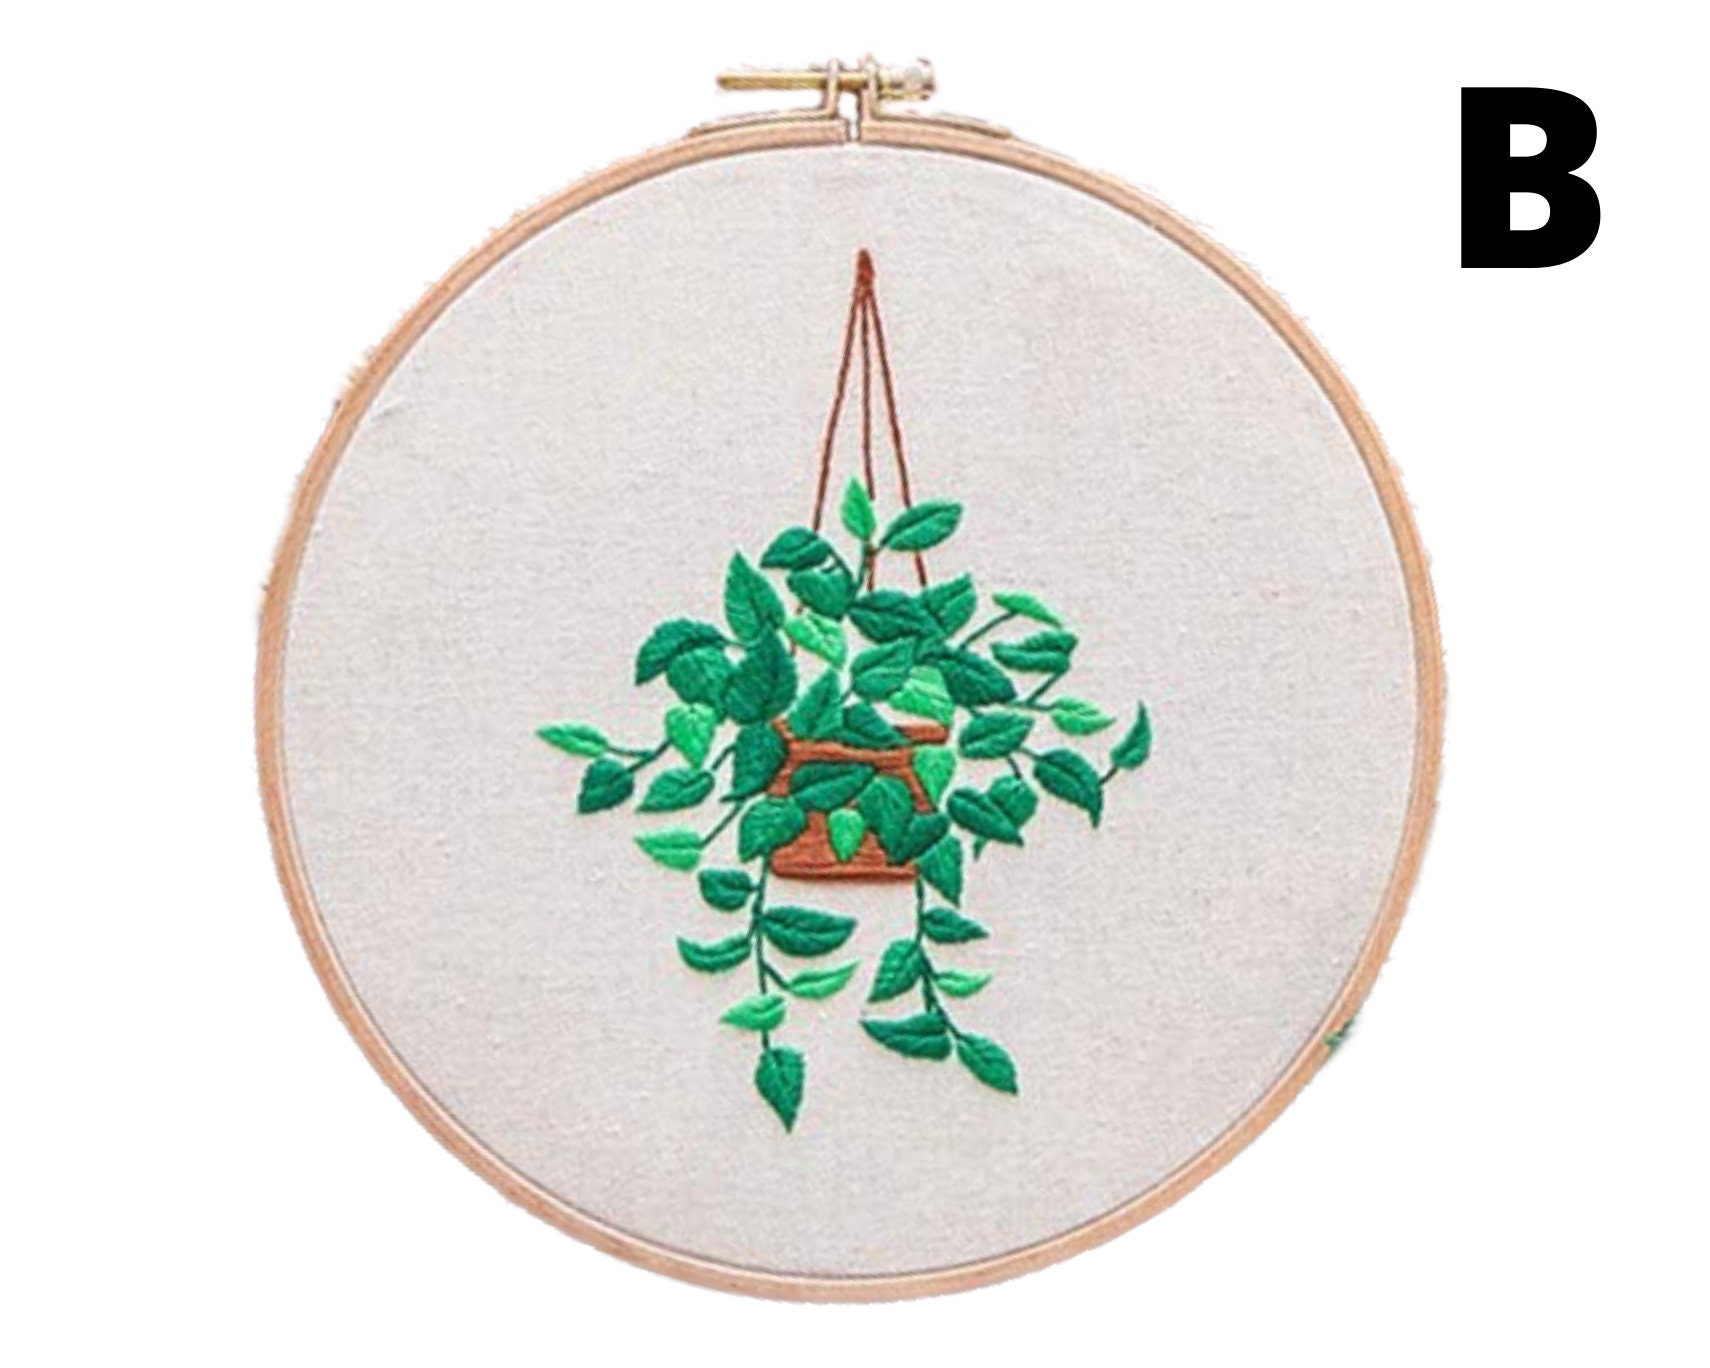 New Design Beginner Embroidery Full Kit With Hoop Wall Decor DIY Craft Kit  Stay at Home Handmade Embroidery Flowers Kids Crafts 